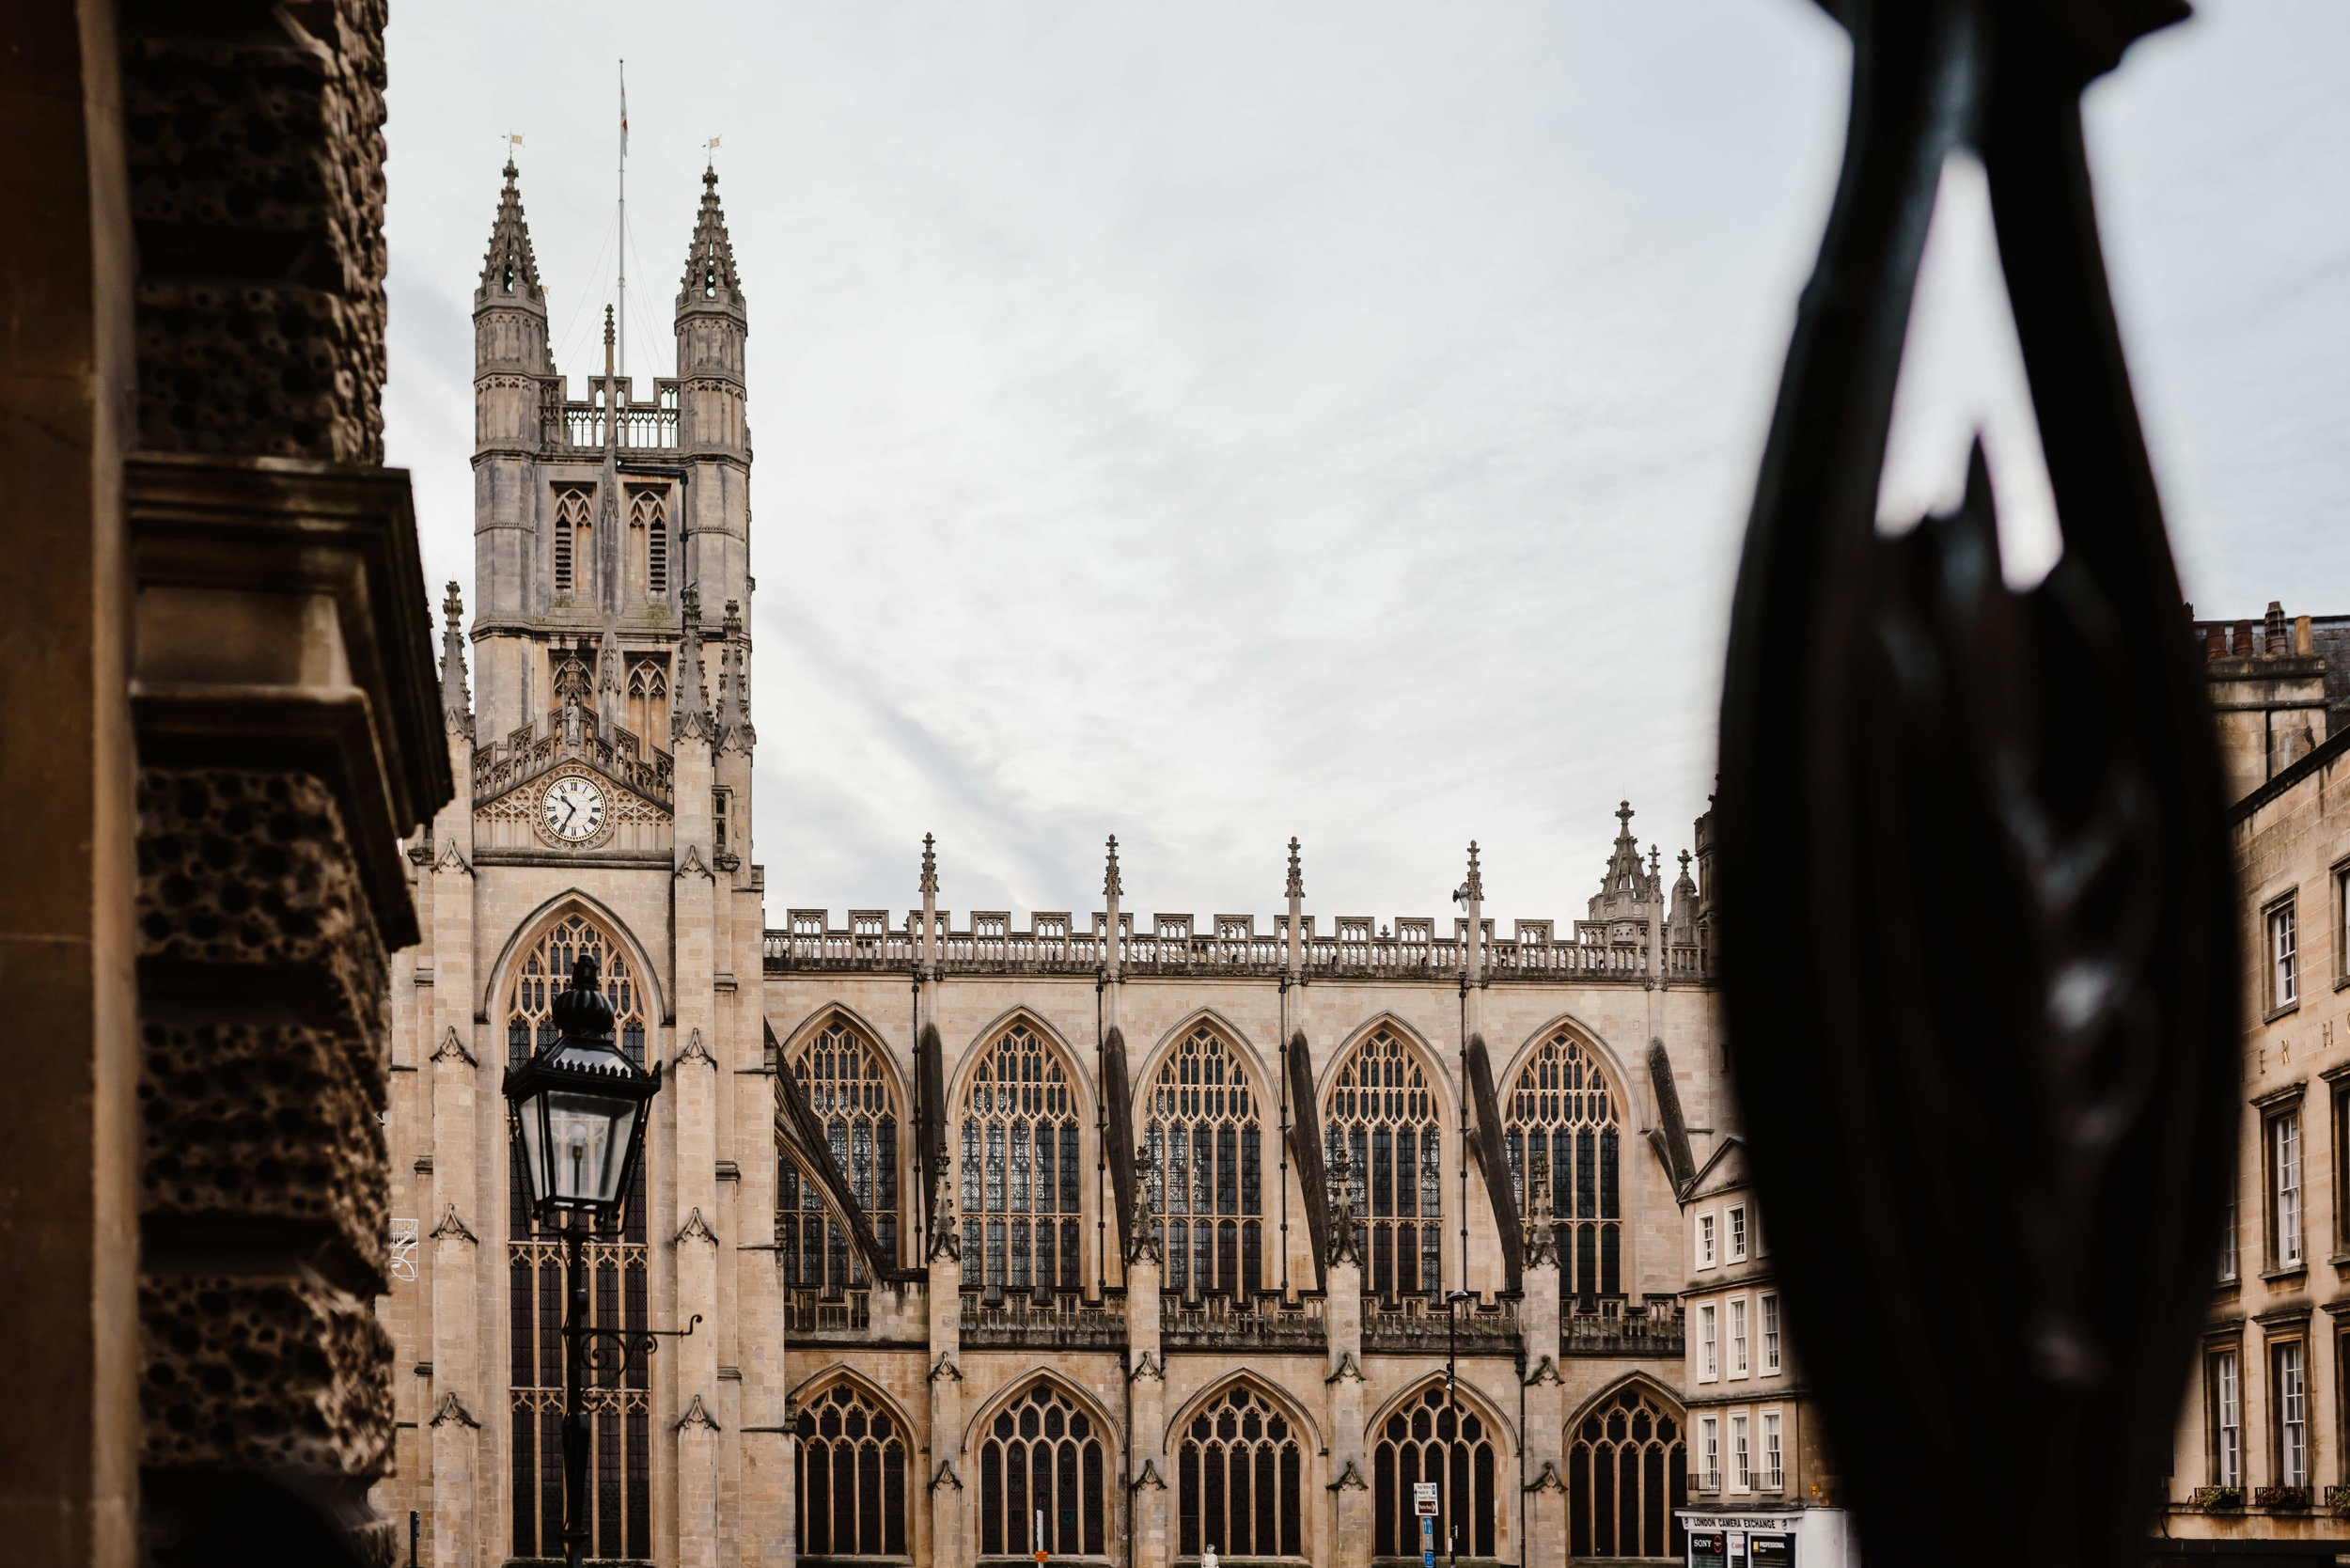 View of Bath Abbey from the Guildhall in Bath UK